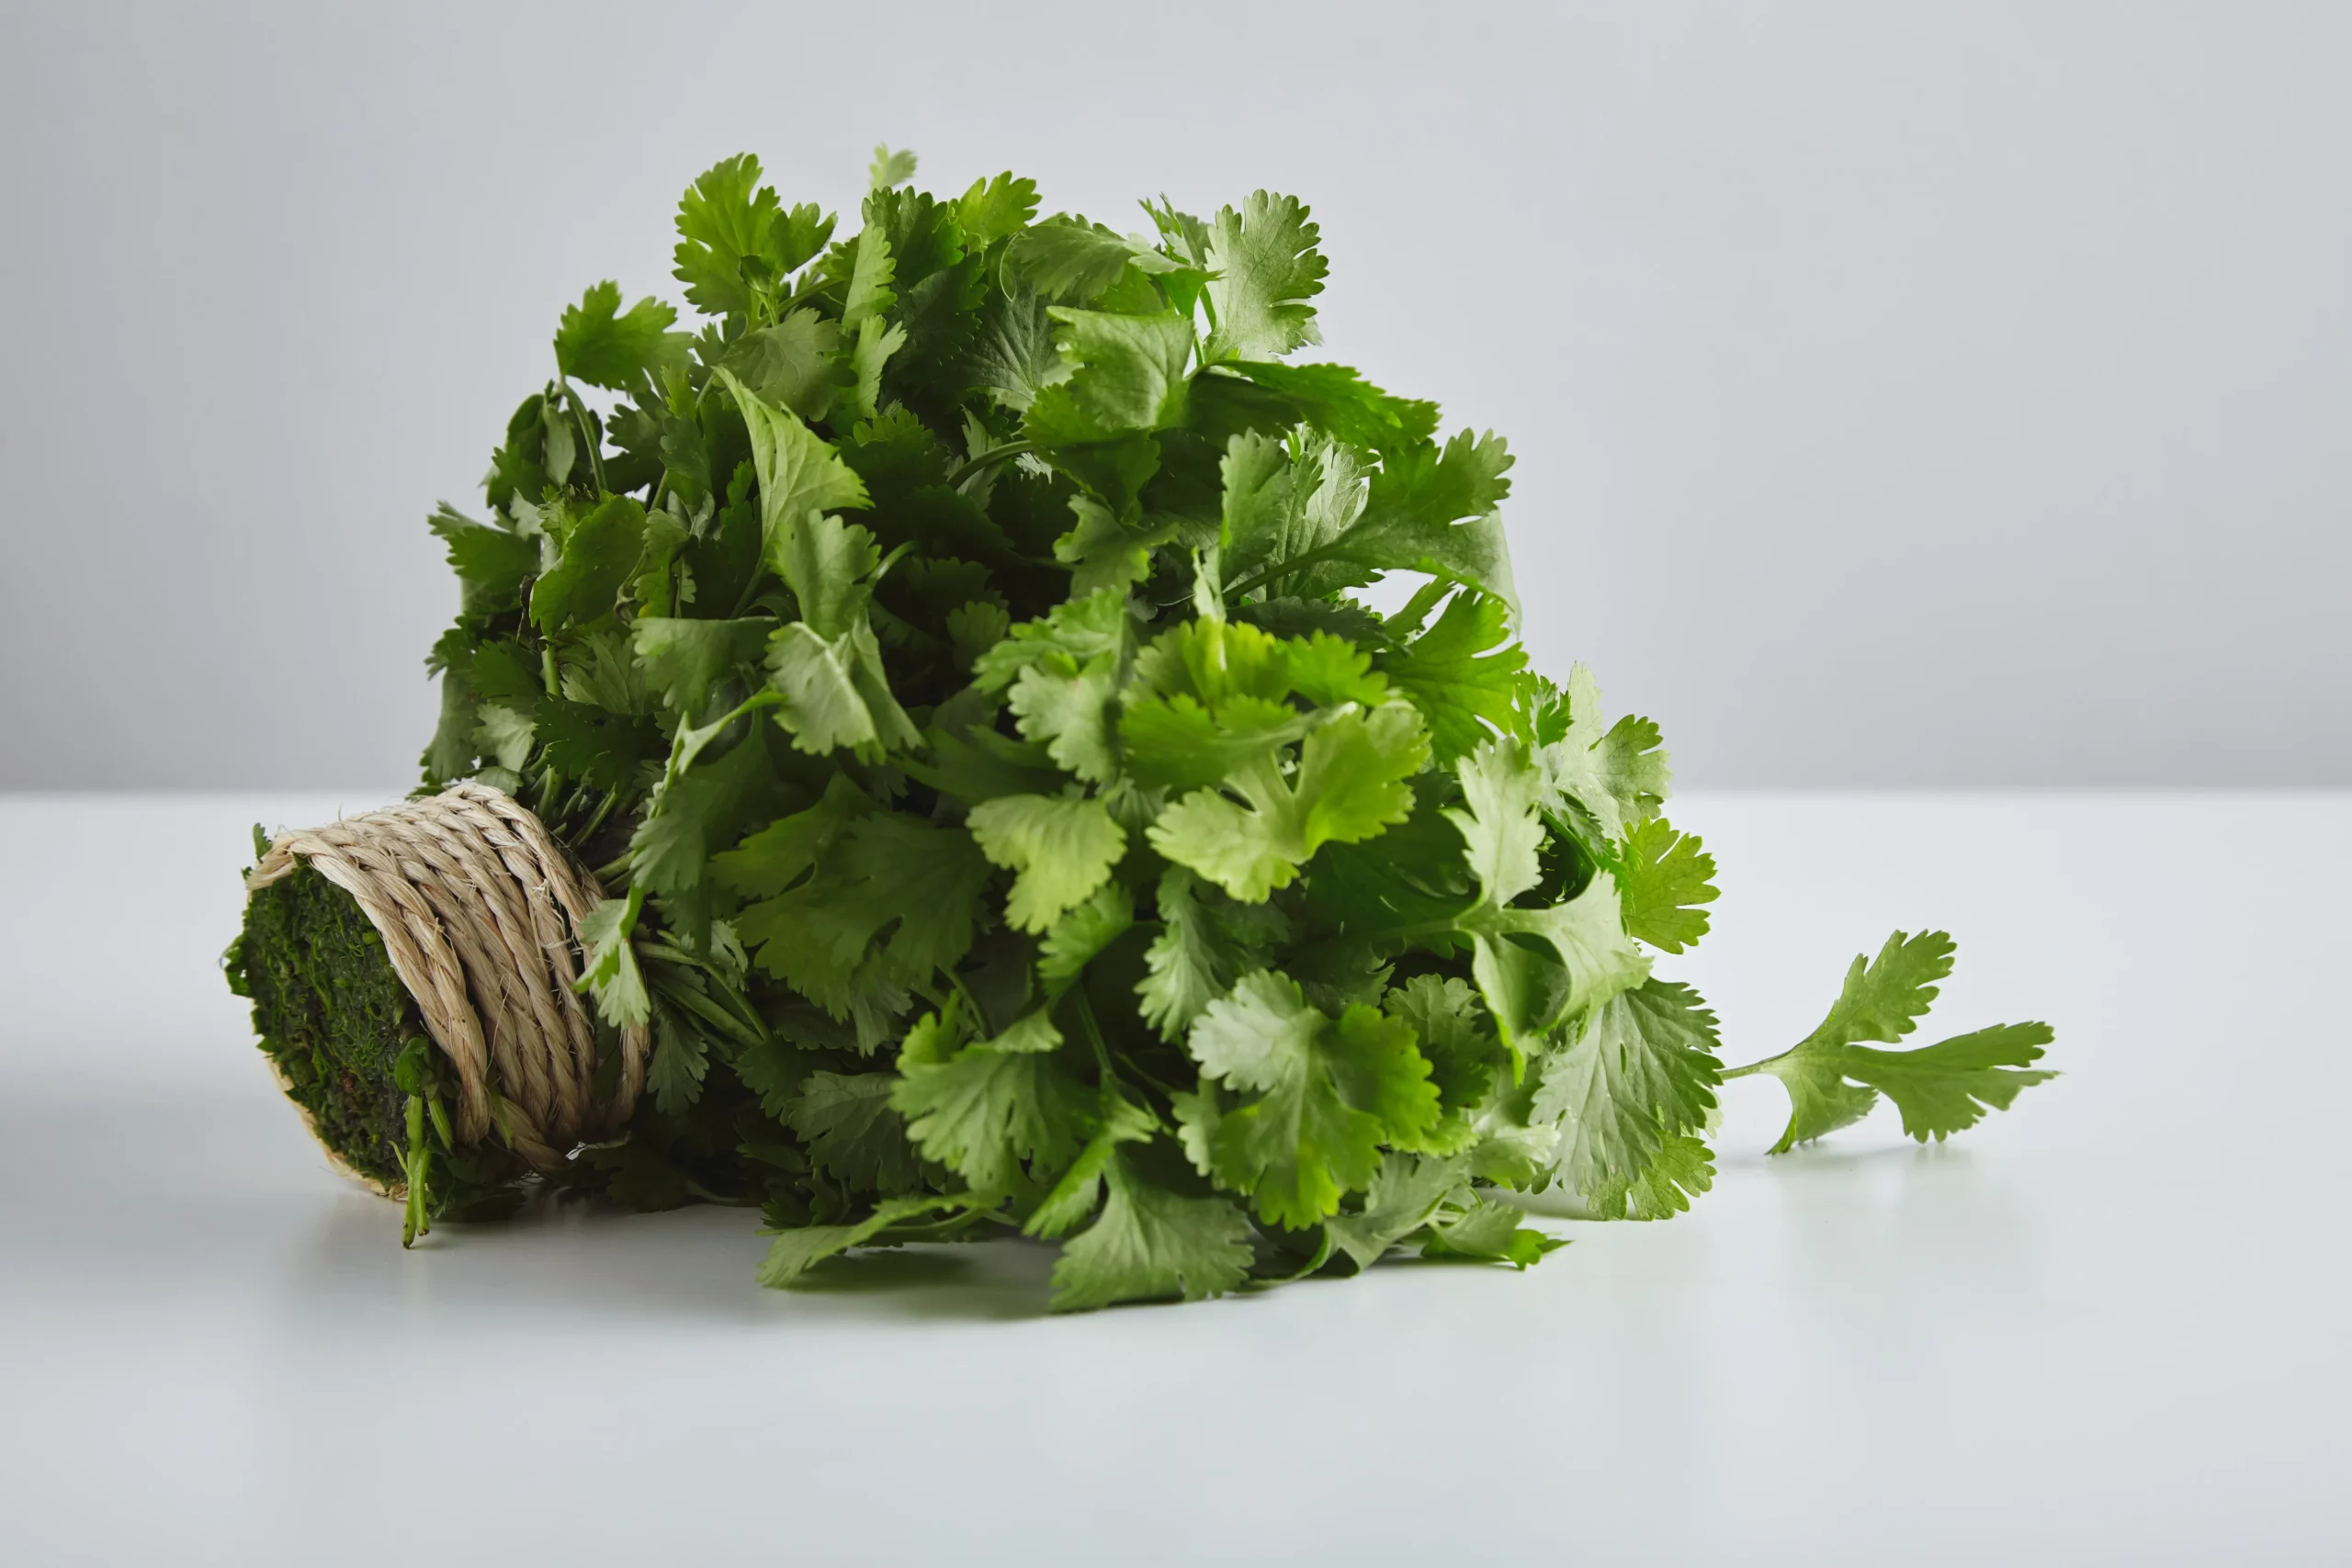 batch-fresh-parsley-cilantro-tied-with-craft-rope-isolated-whte-table